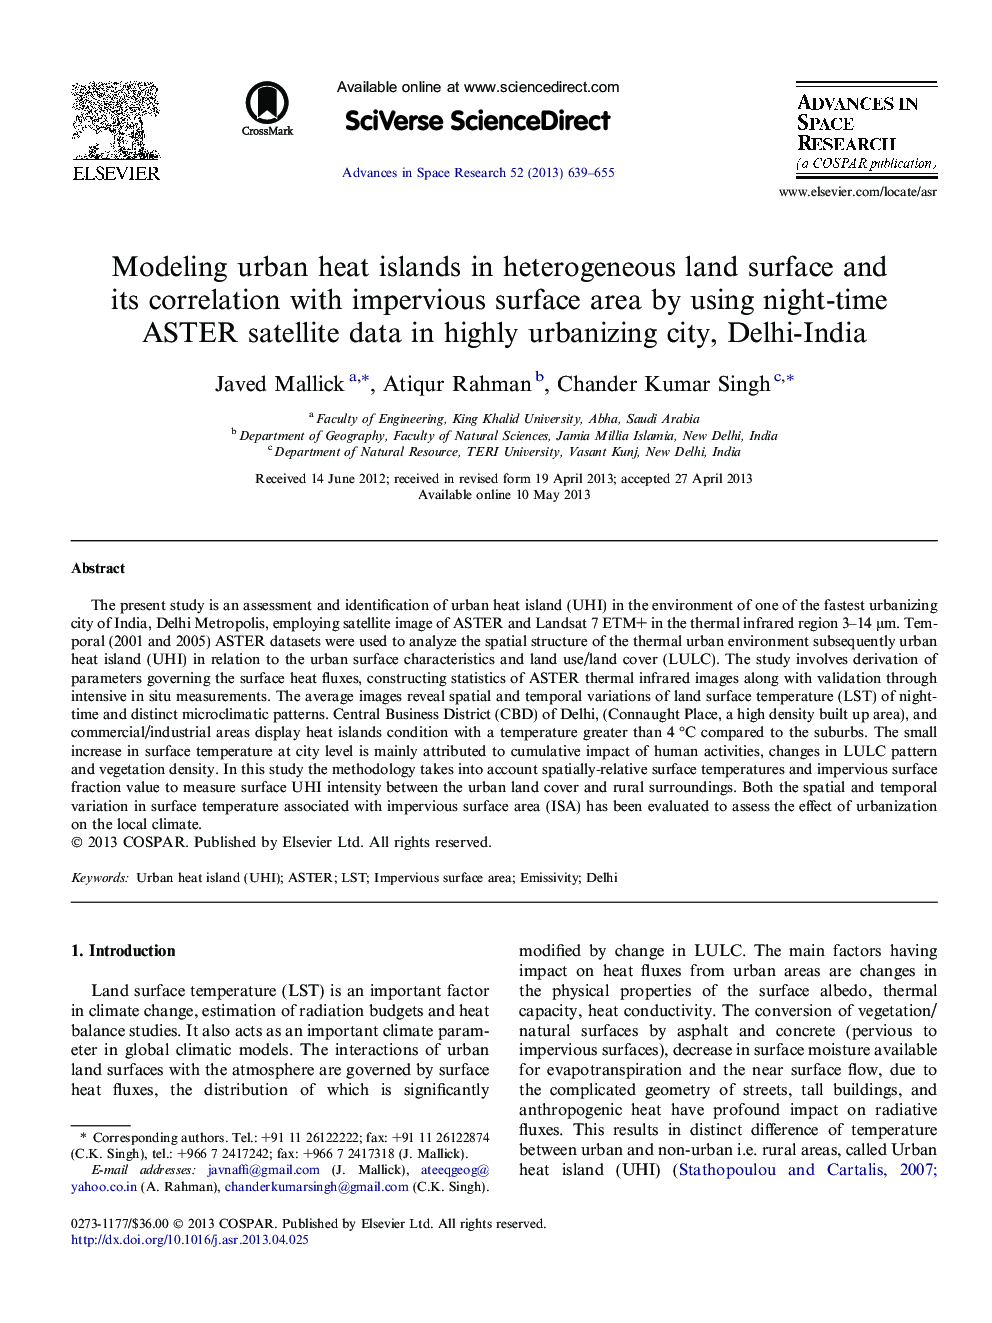 Modeling urban heat islands in heterogeneous land surface and its correlation with impervious surface area by using night-time ASTER satellite data in highly urbanizing city, Delhi-India